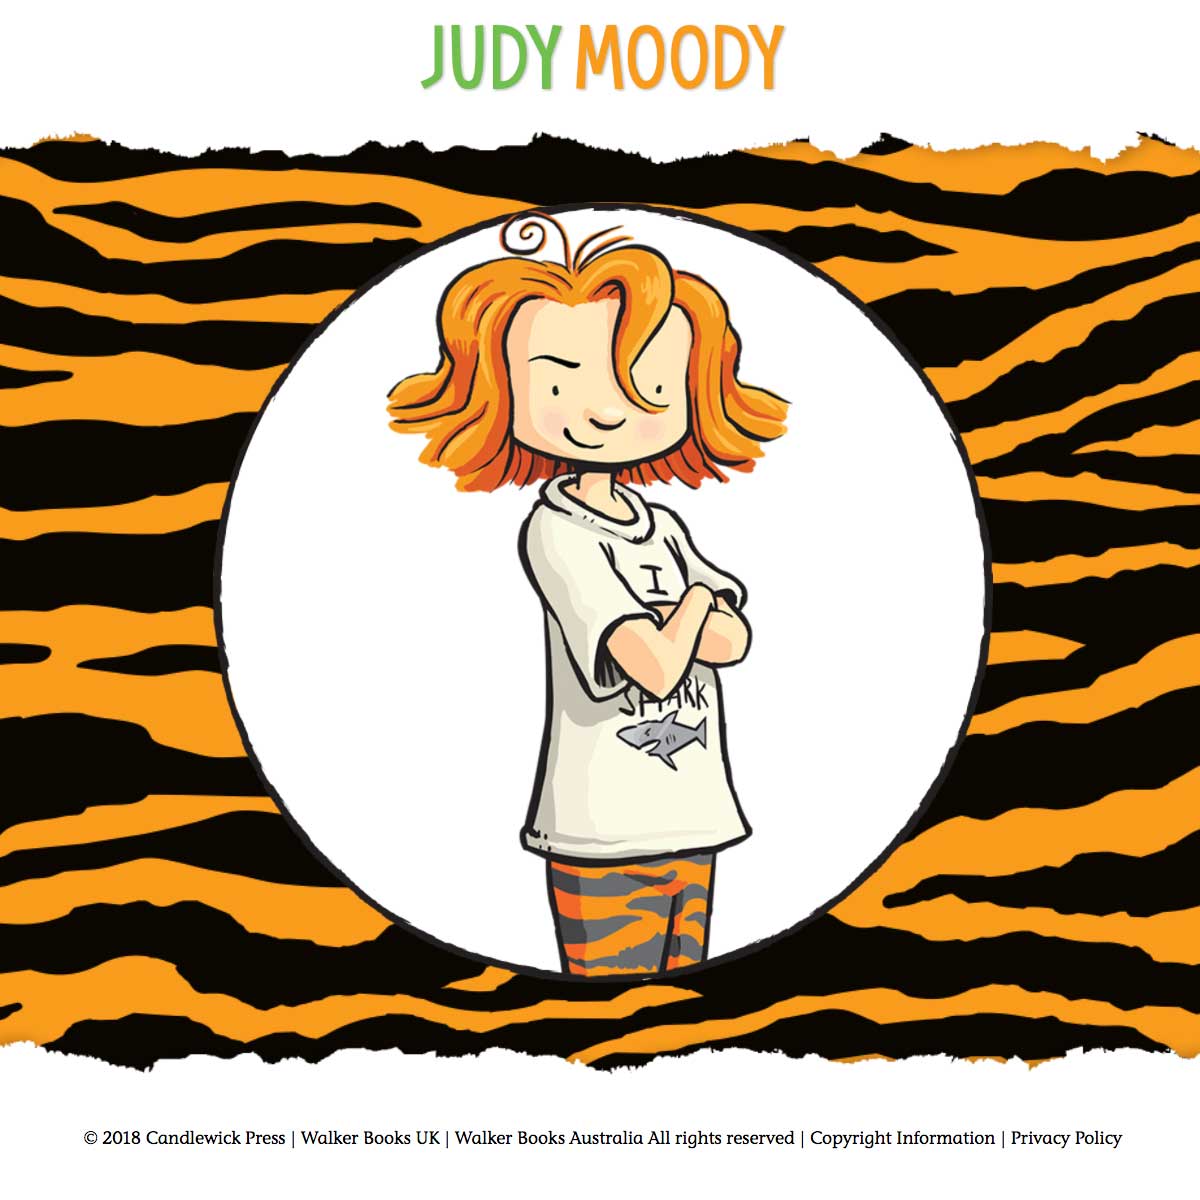 Judy Moody | Judy Moody rules! Boys and girls everywhere are relating to  Judy's many moods and laughing at her hilarious adventures.